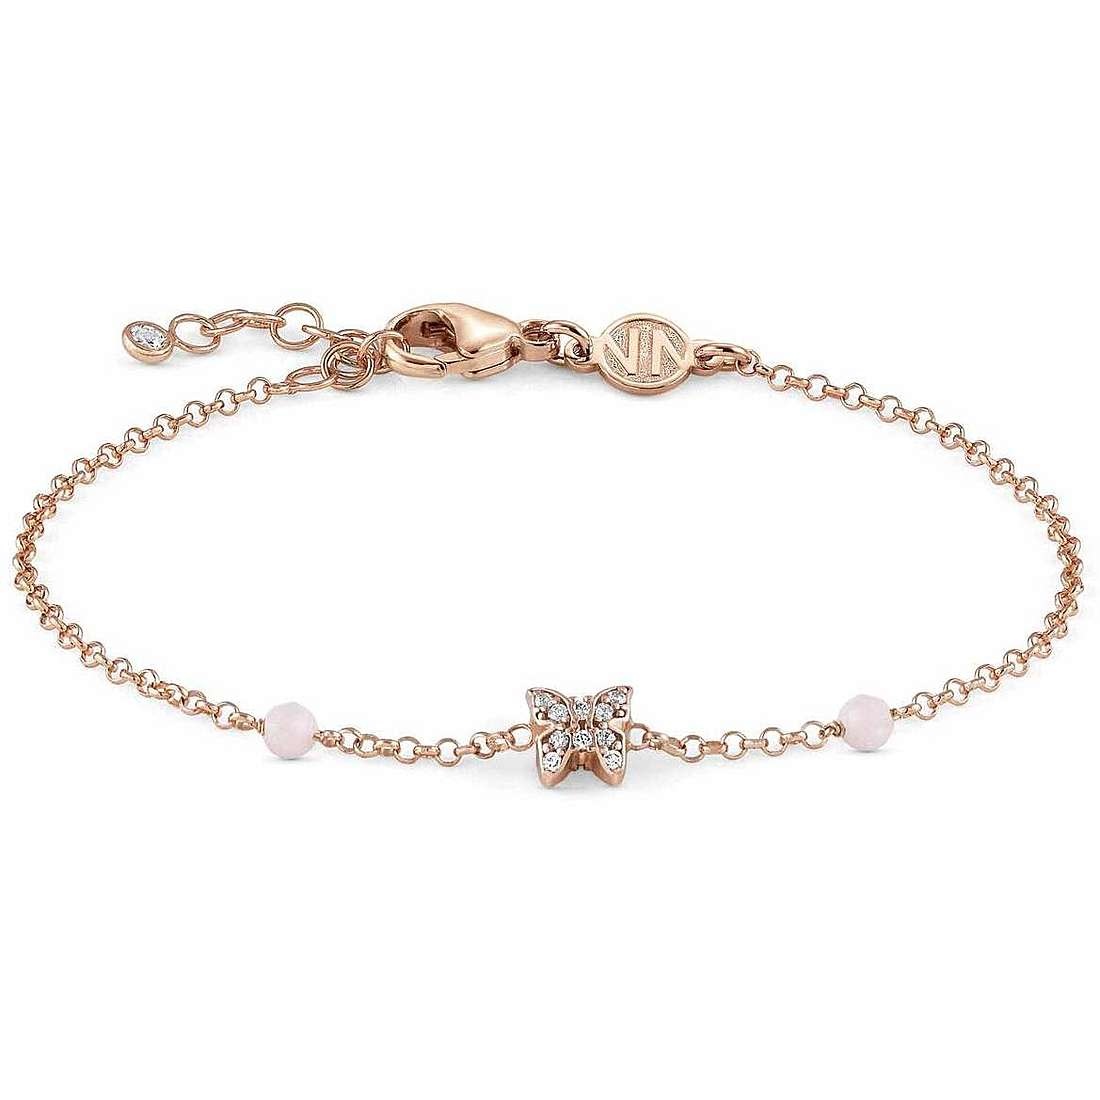 NOMINATION STERLING SILVER ROSE GOLD PLATED CABLE LINK WITH CUBIZ ZIRCONIA BUTTERFLY CHARM AND PINK BEADS BRACELET